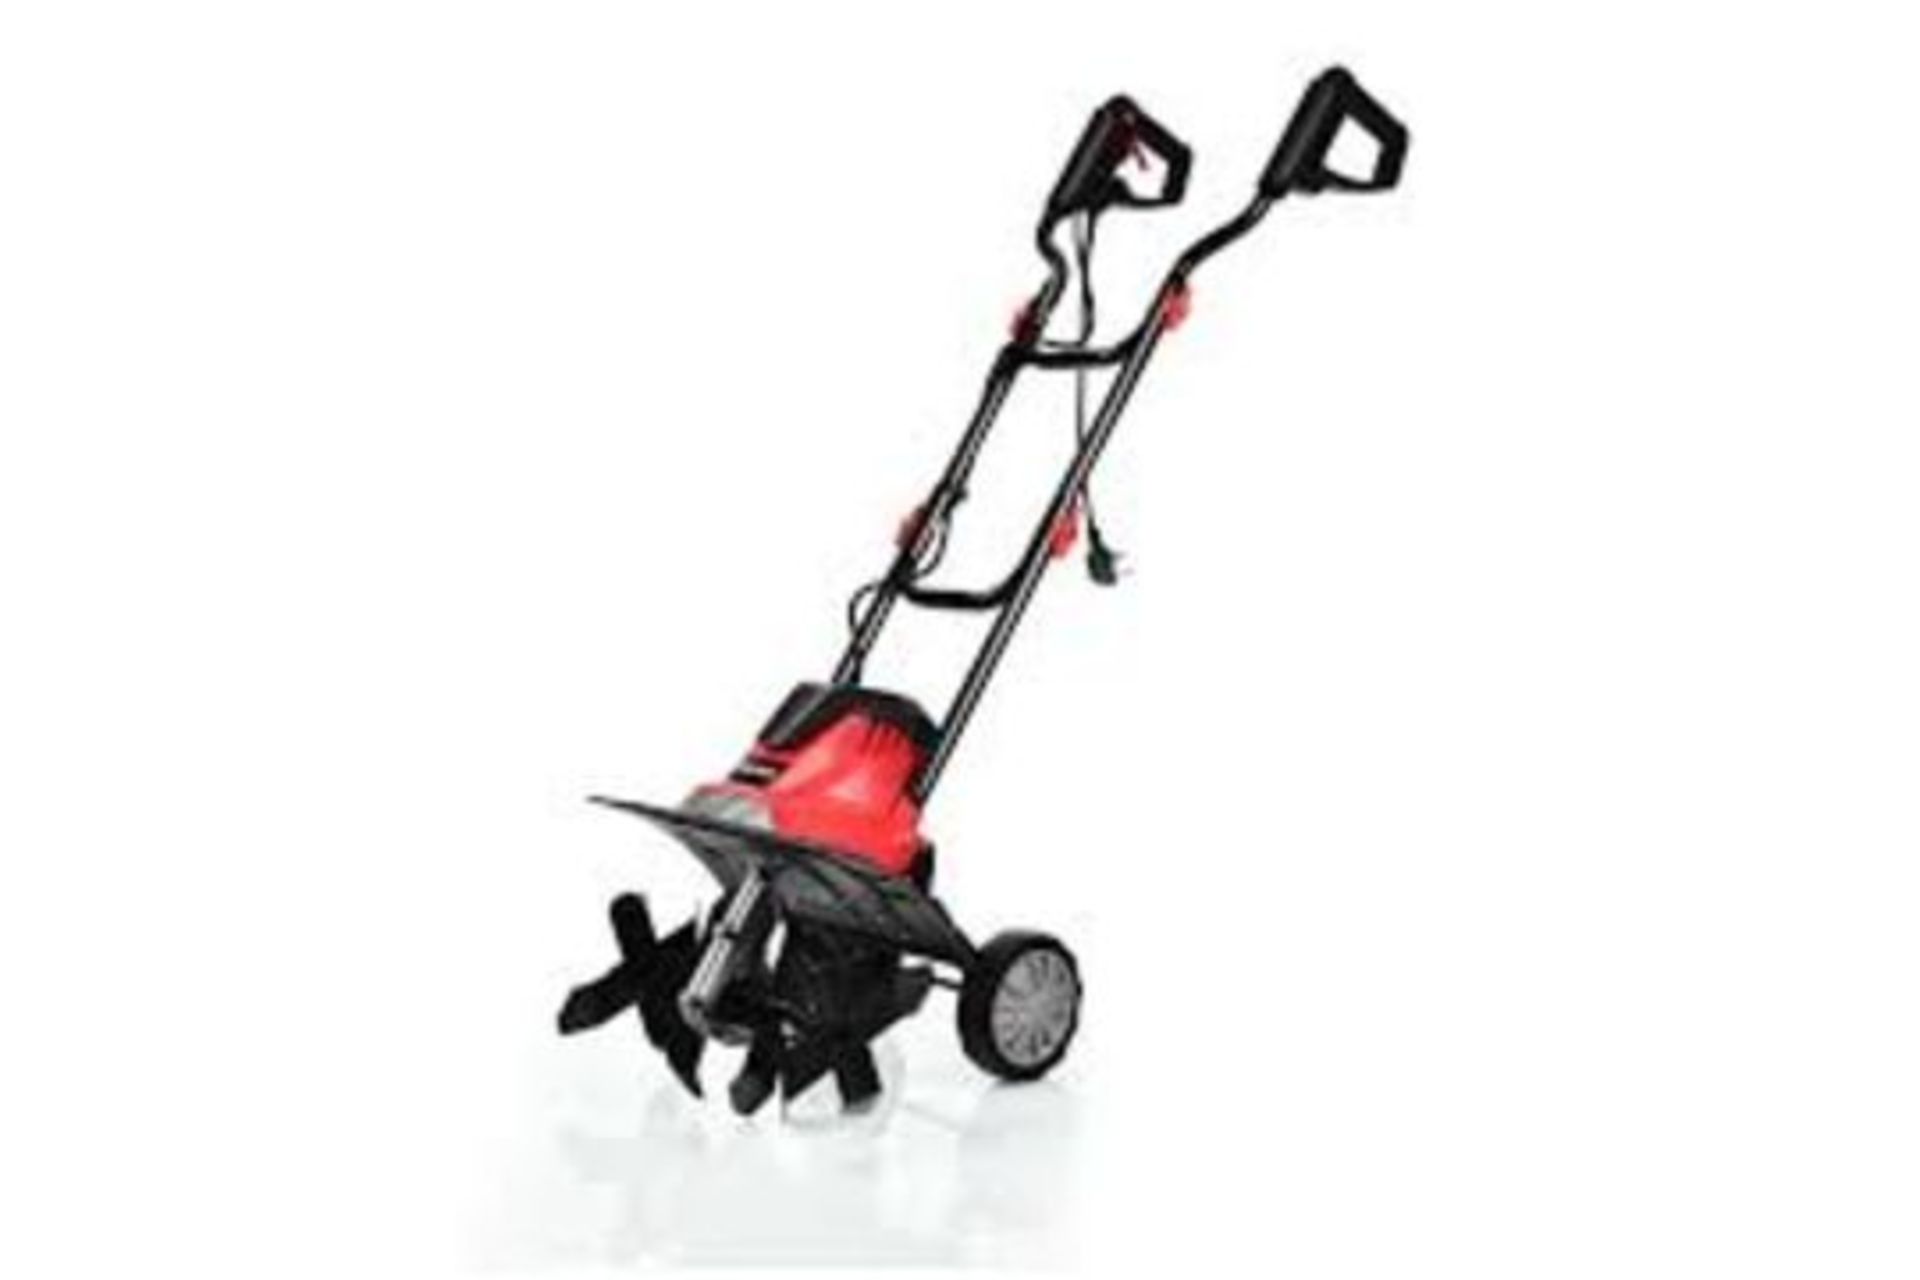 1200W Electric Garden Tiller/Cultivator with 4 Blade Till. - R14.15. Are you still struggling with